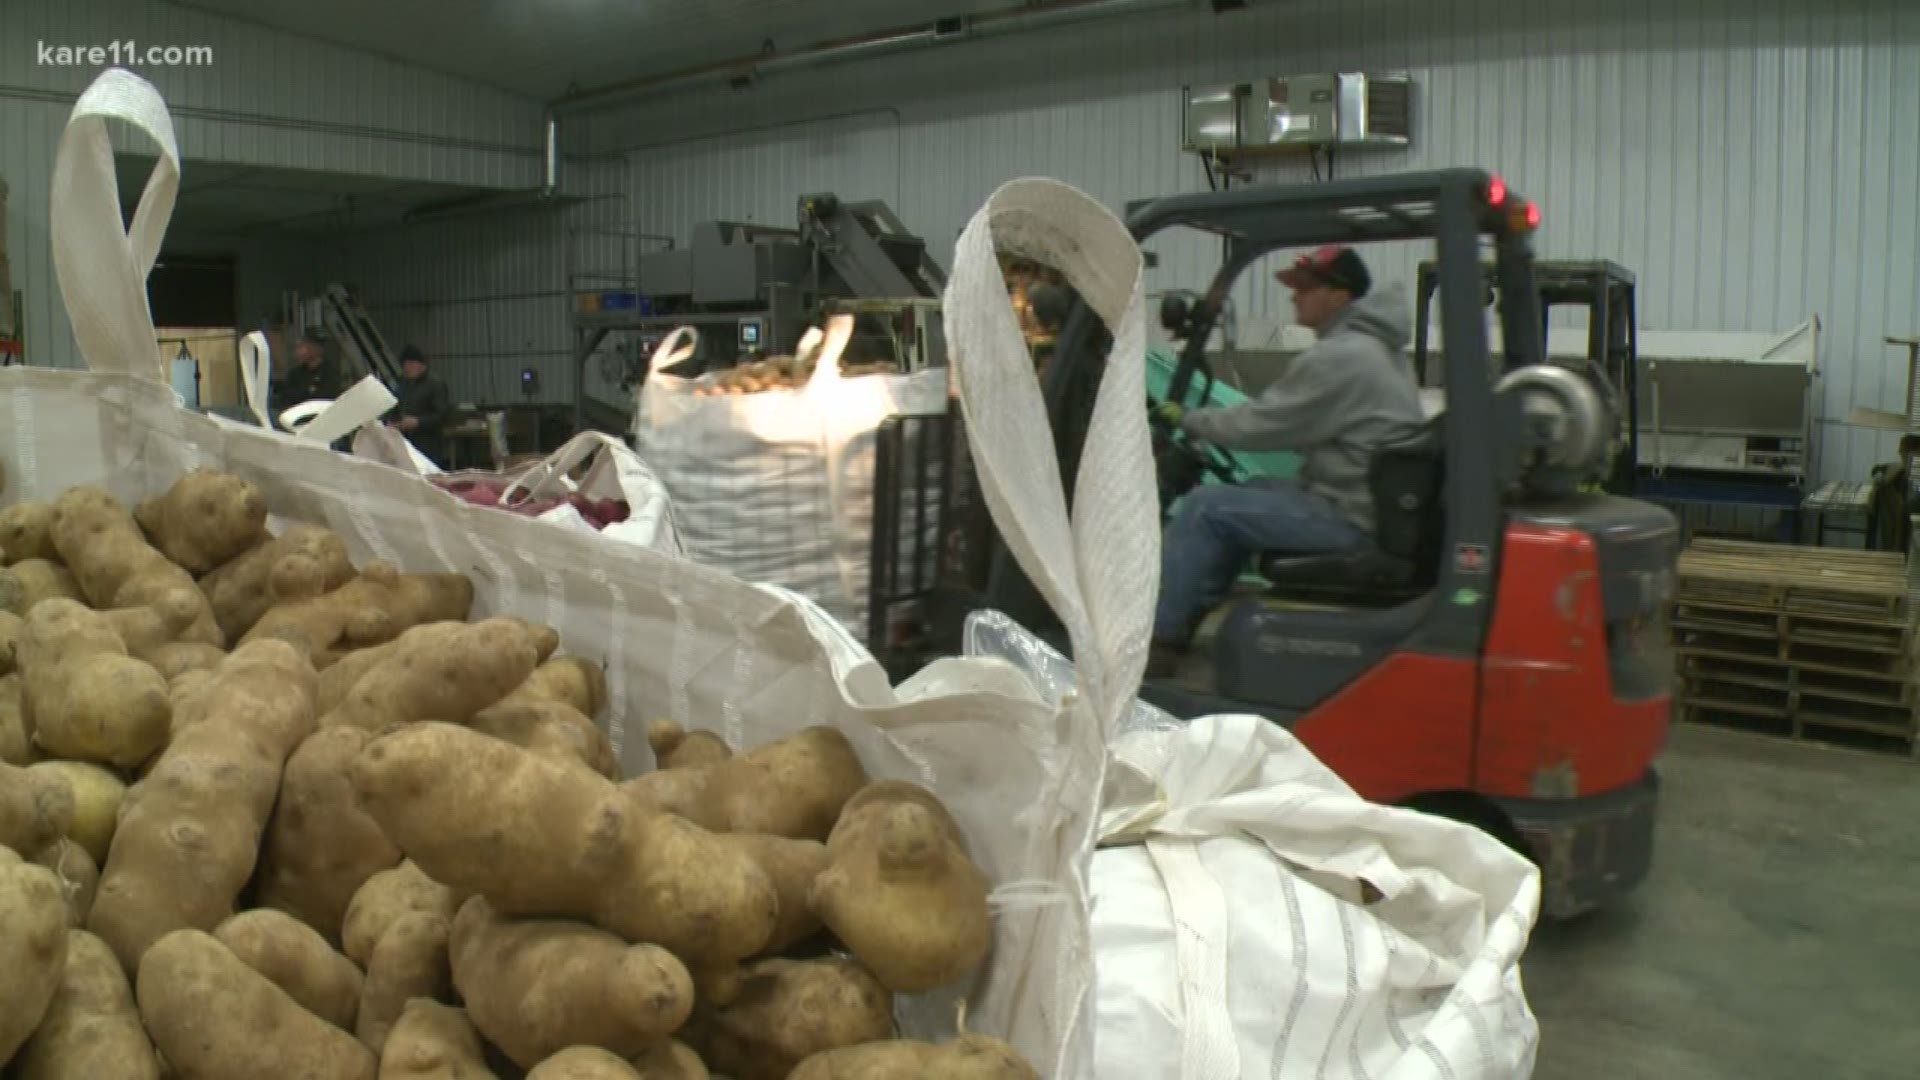 Thousands of people will be dishing up a little taste of Minnesota on their Thanksgiving plates this year. A central Minnesota farm is donating thousands of pounds of potatoes to feed those in need.